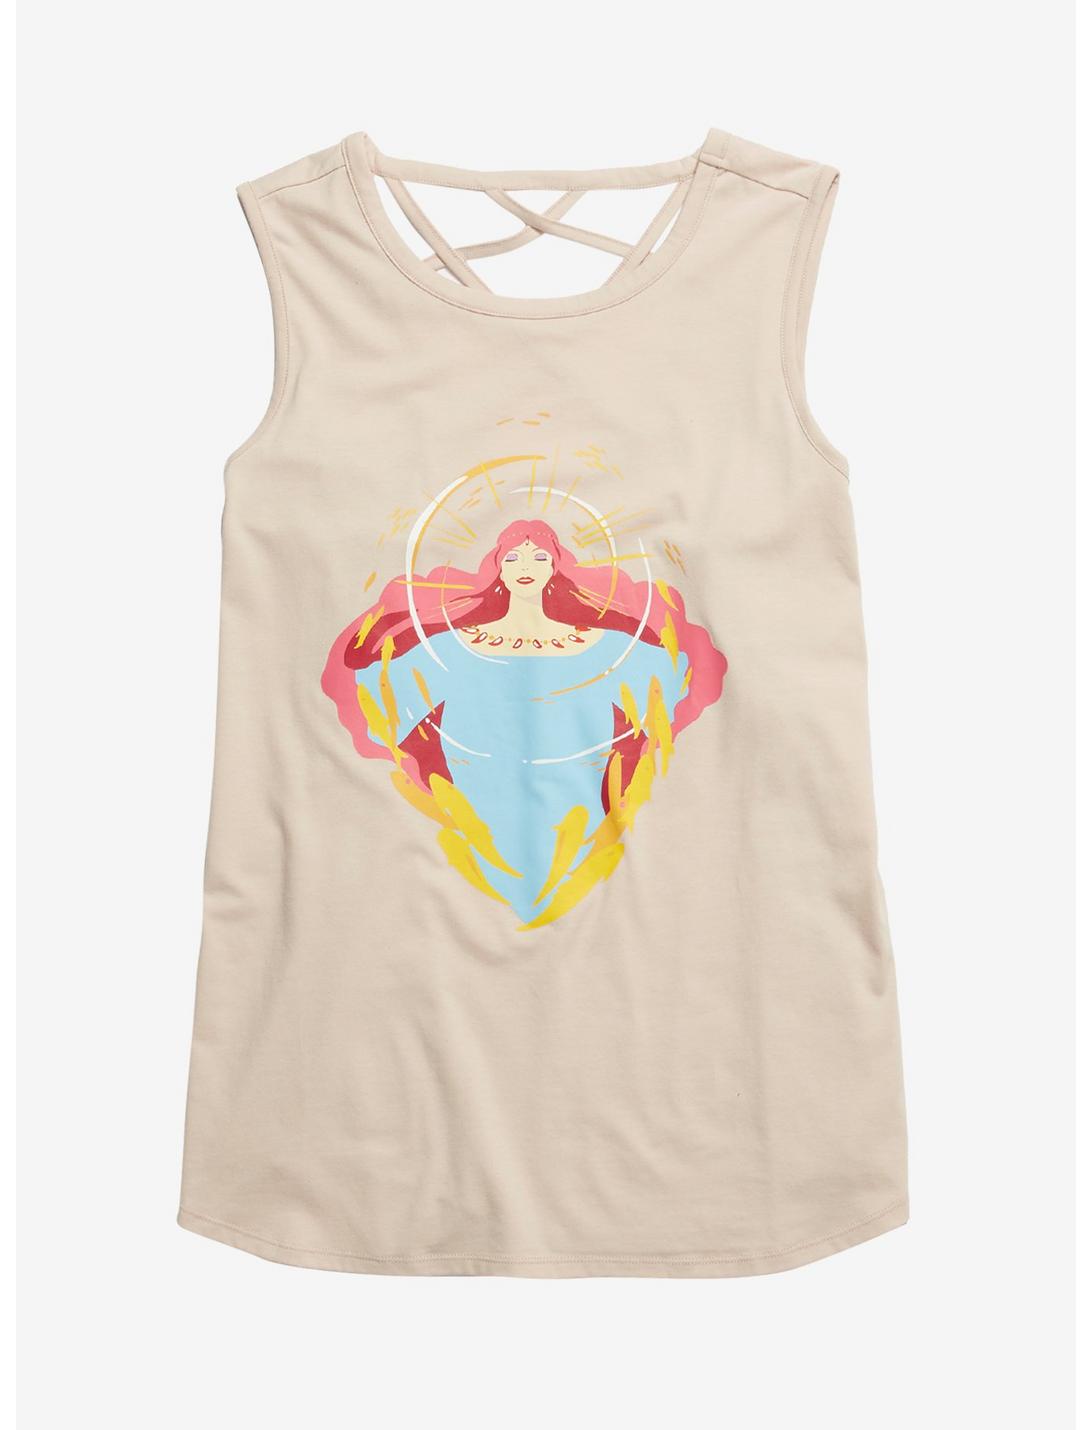 Her Universe Studio Ghibli Earth Day Collection Ponyo Granmamare Girls Crosscross Back Tank Top Plus Size, MULTI, hi-res